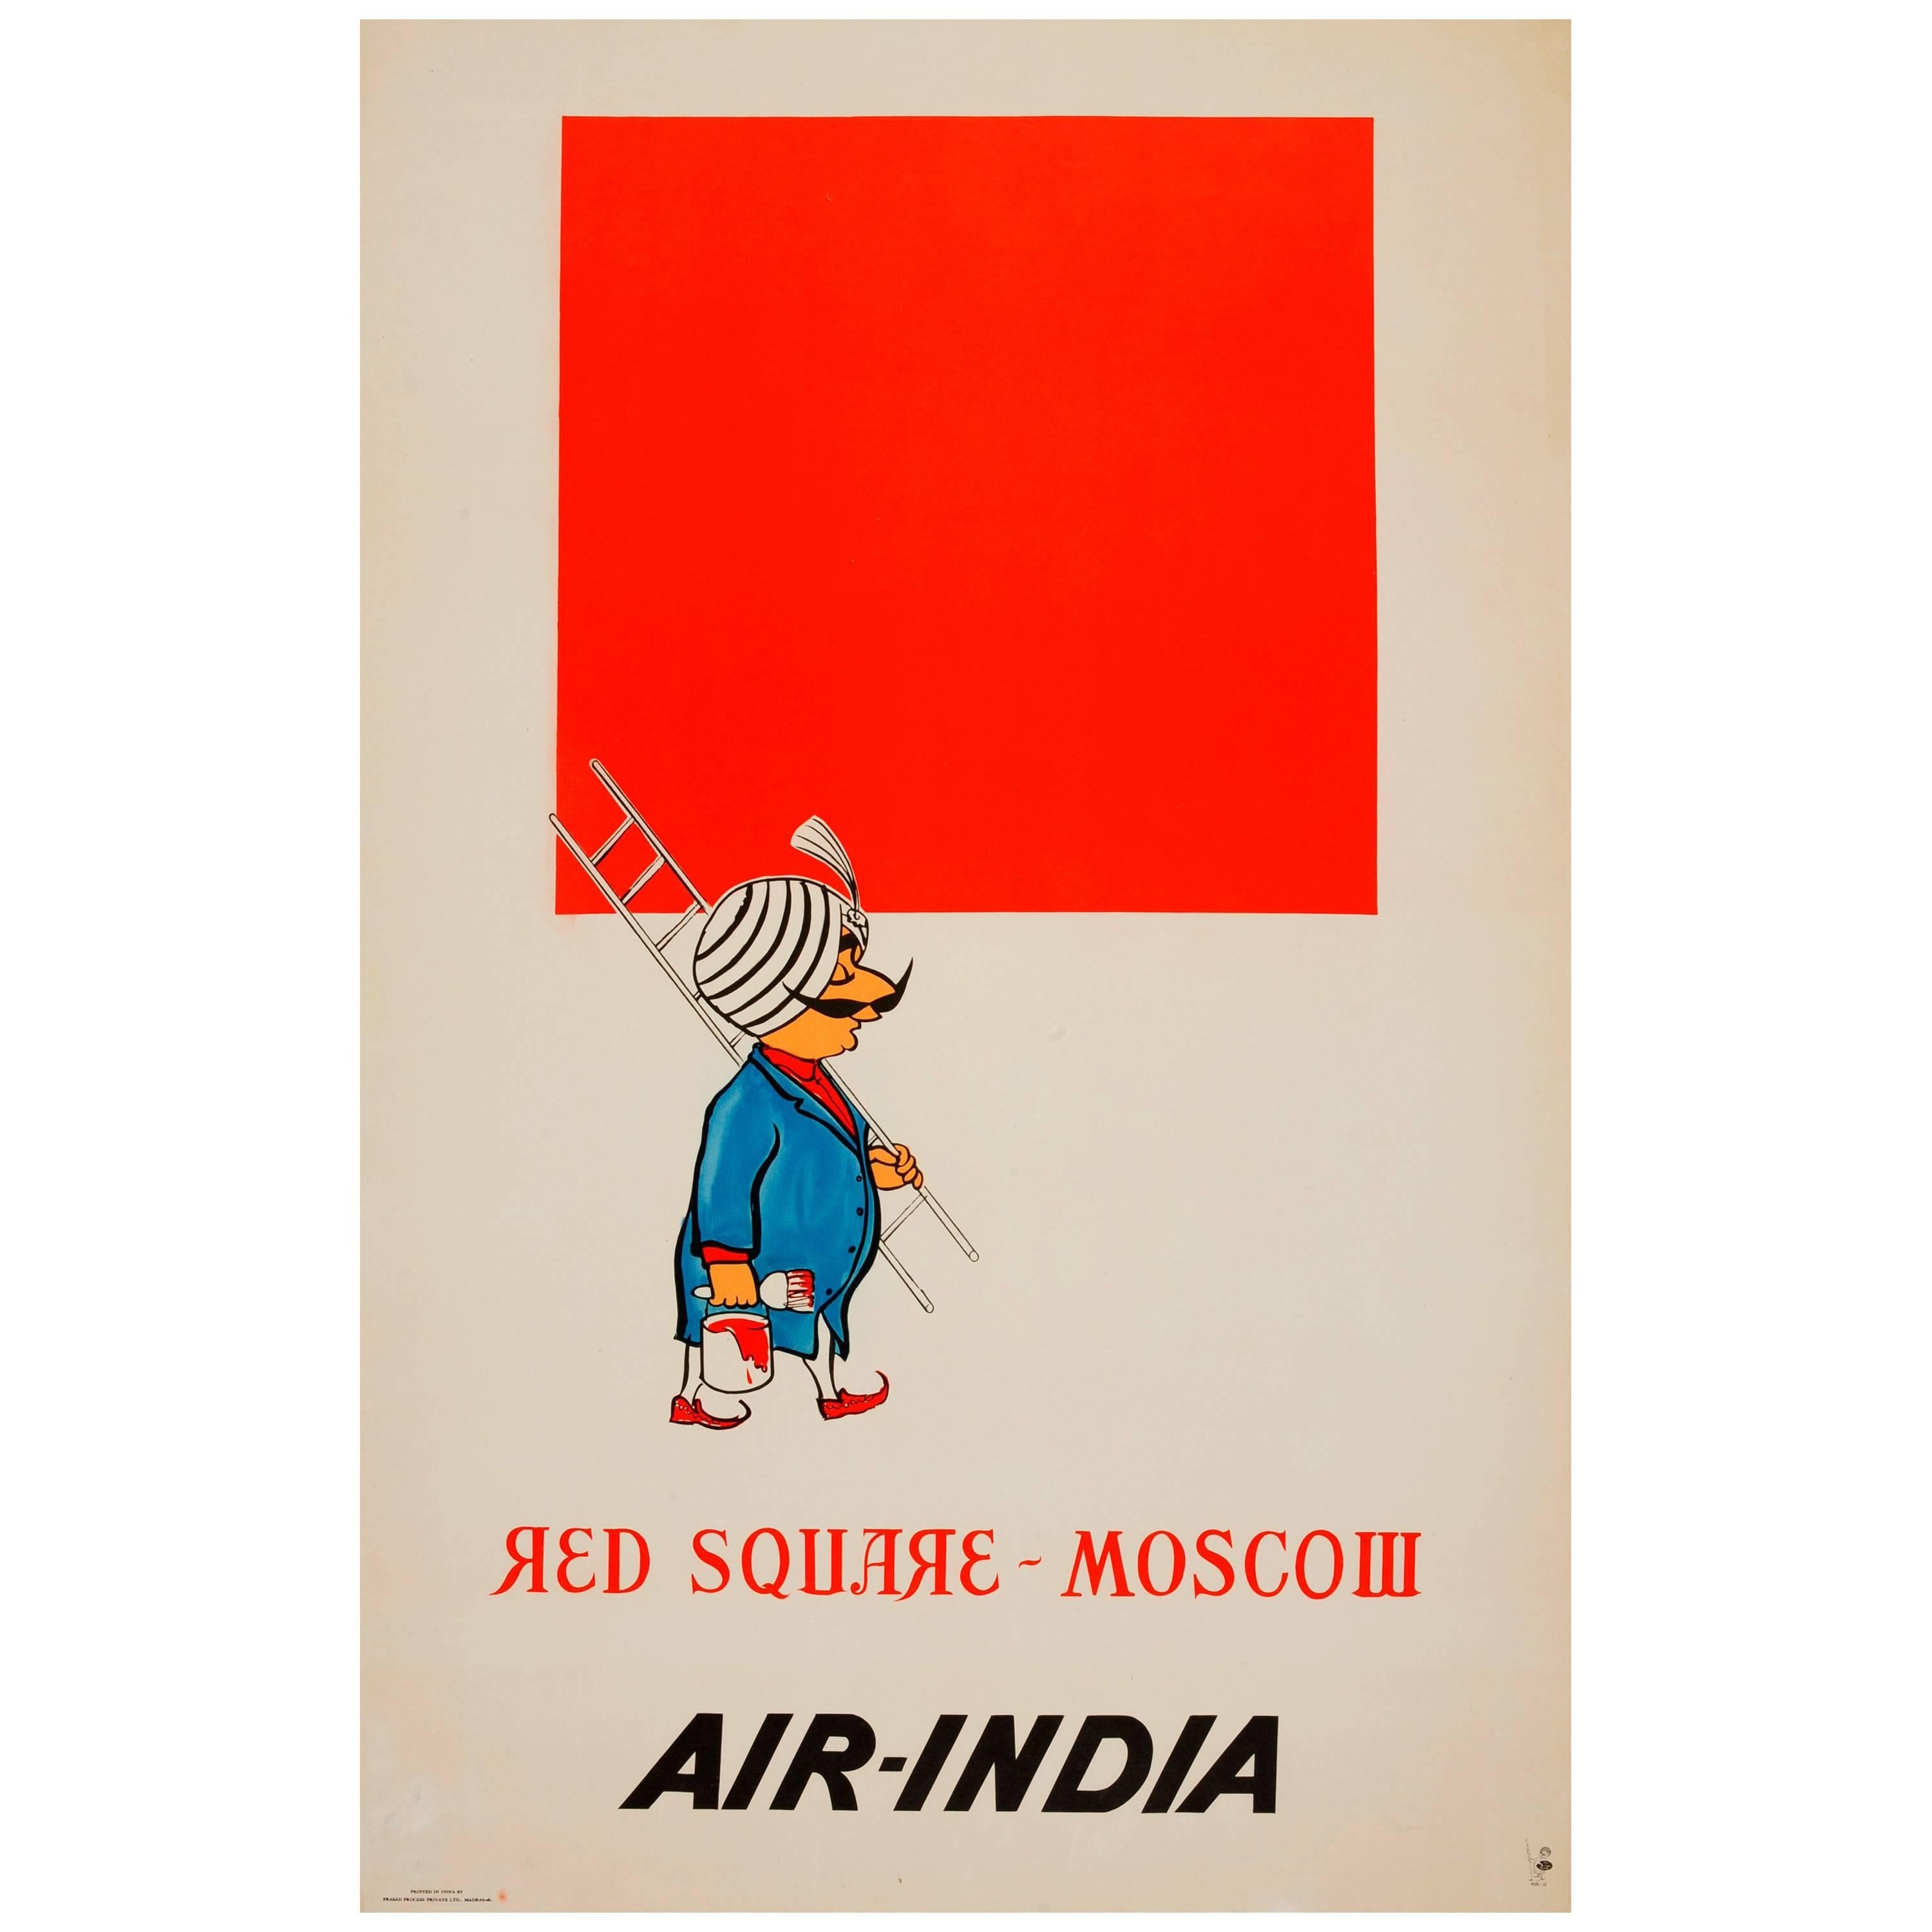 Rare Original Vintage Malevich Style Air India Travel Poster - Red Square Moscow